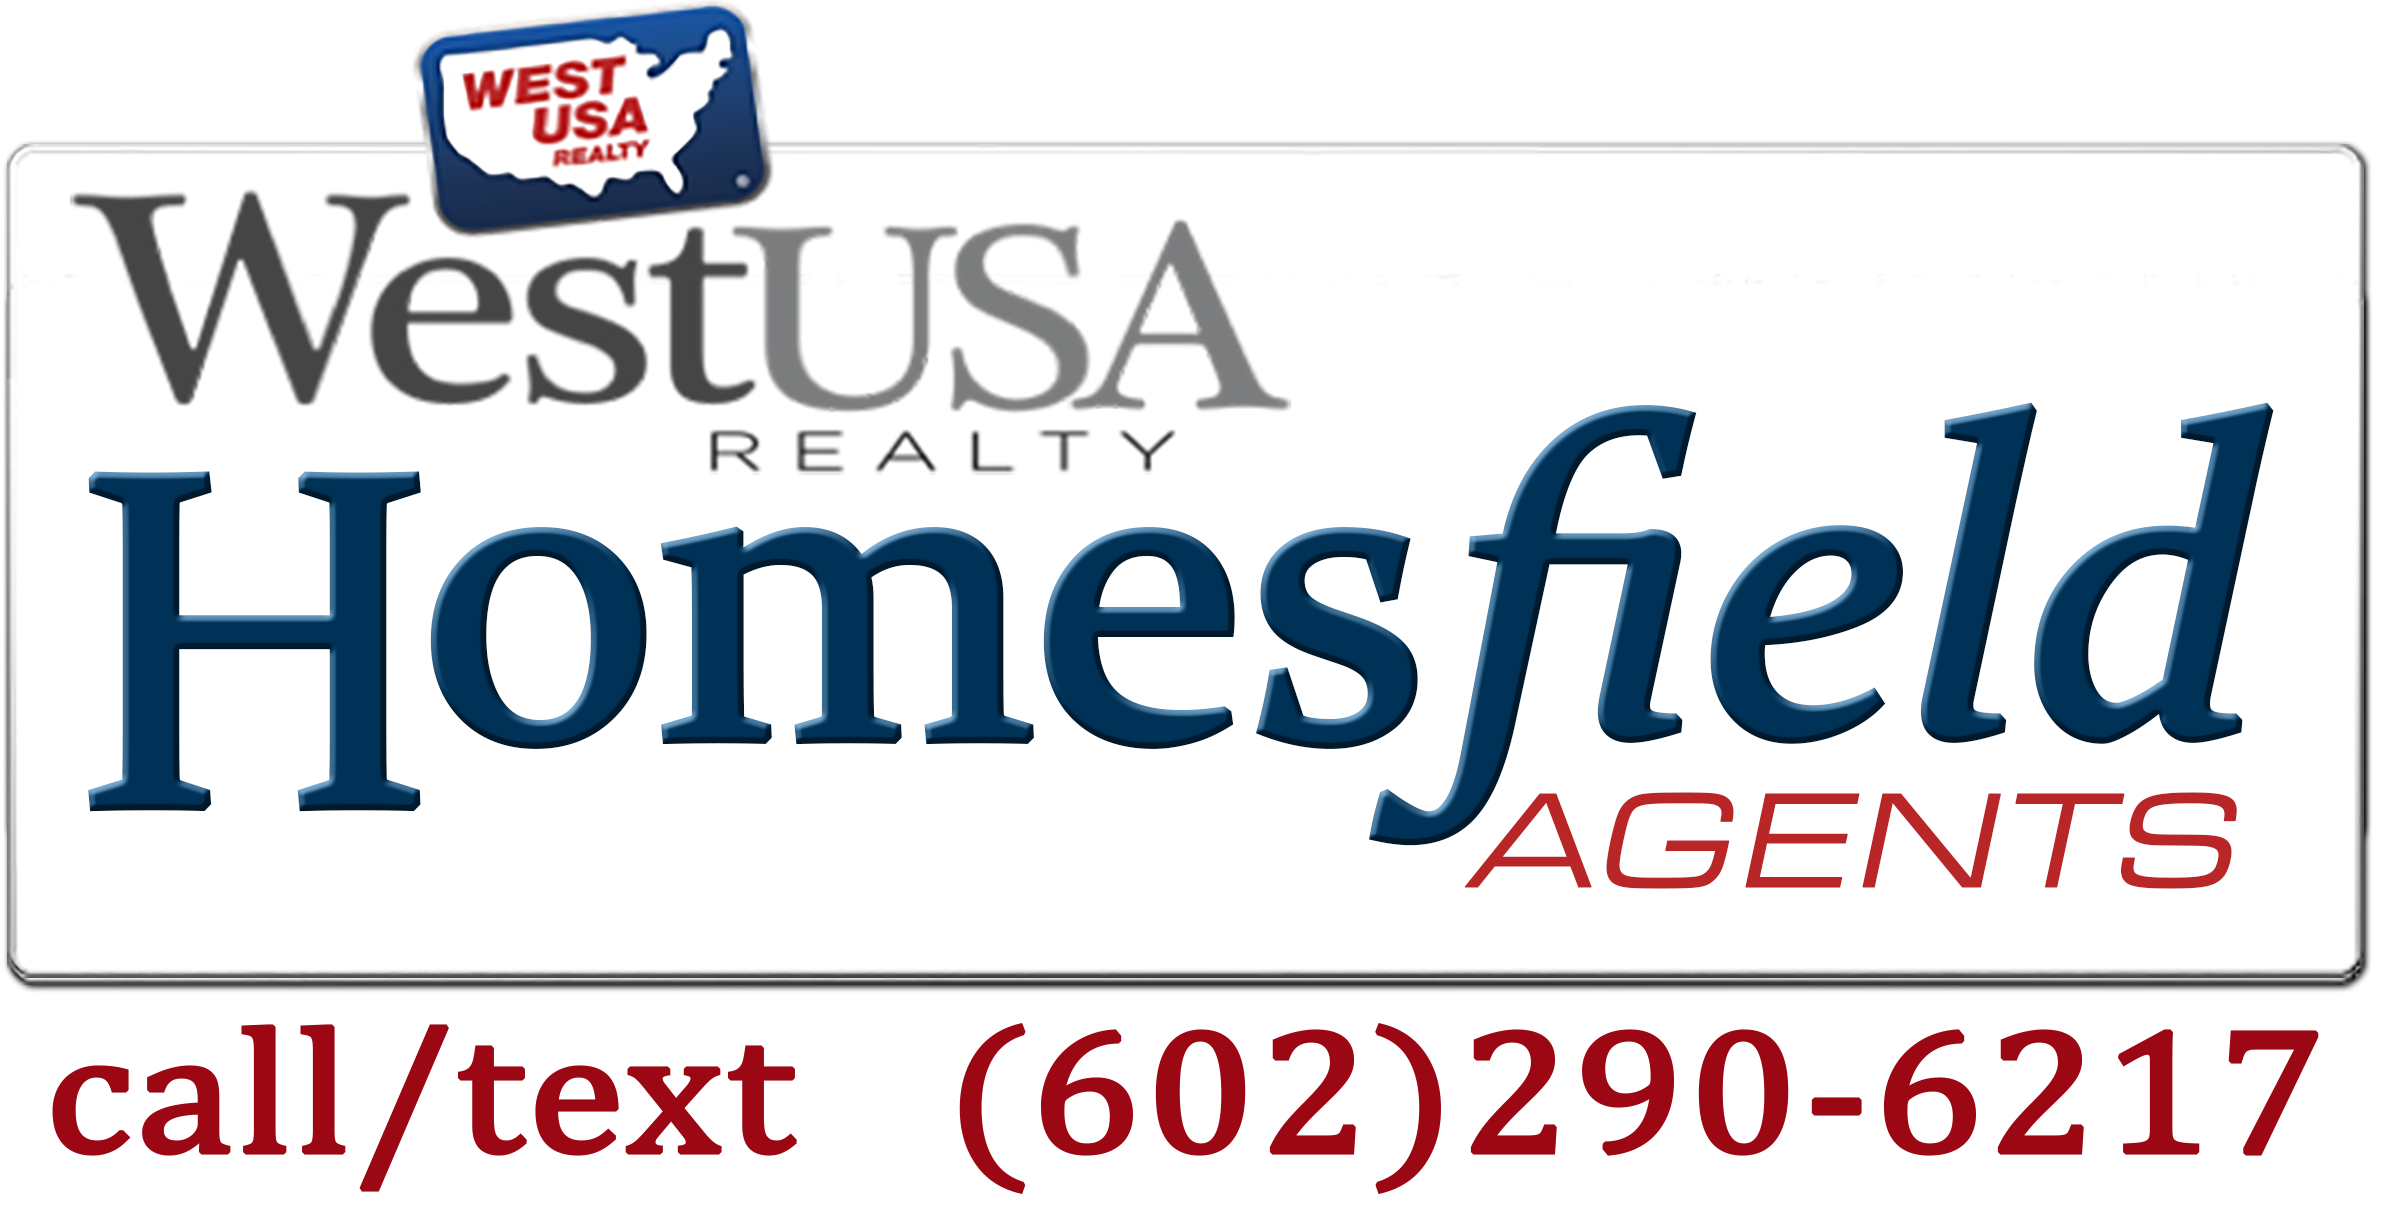 Homesfield Agents of West USA Realty Wickenburg